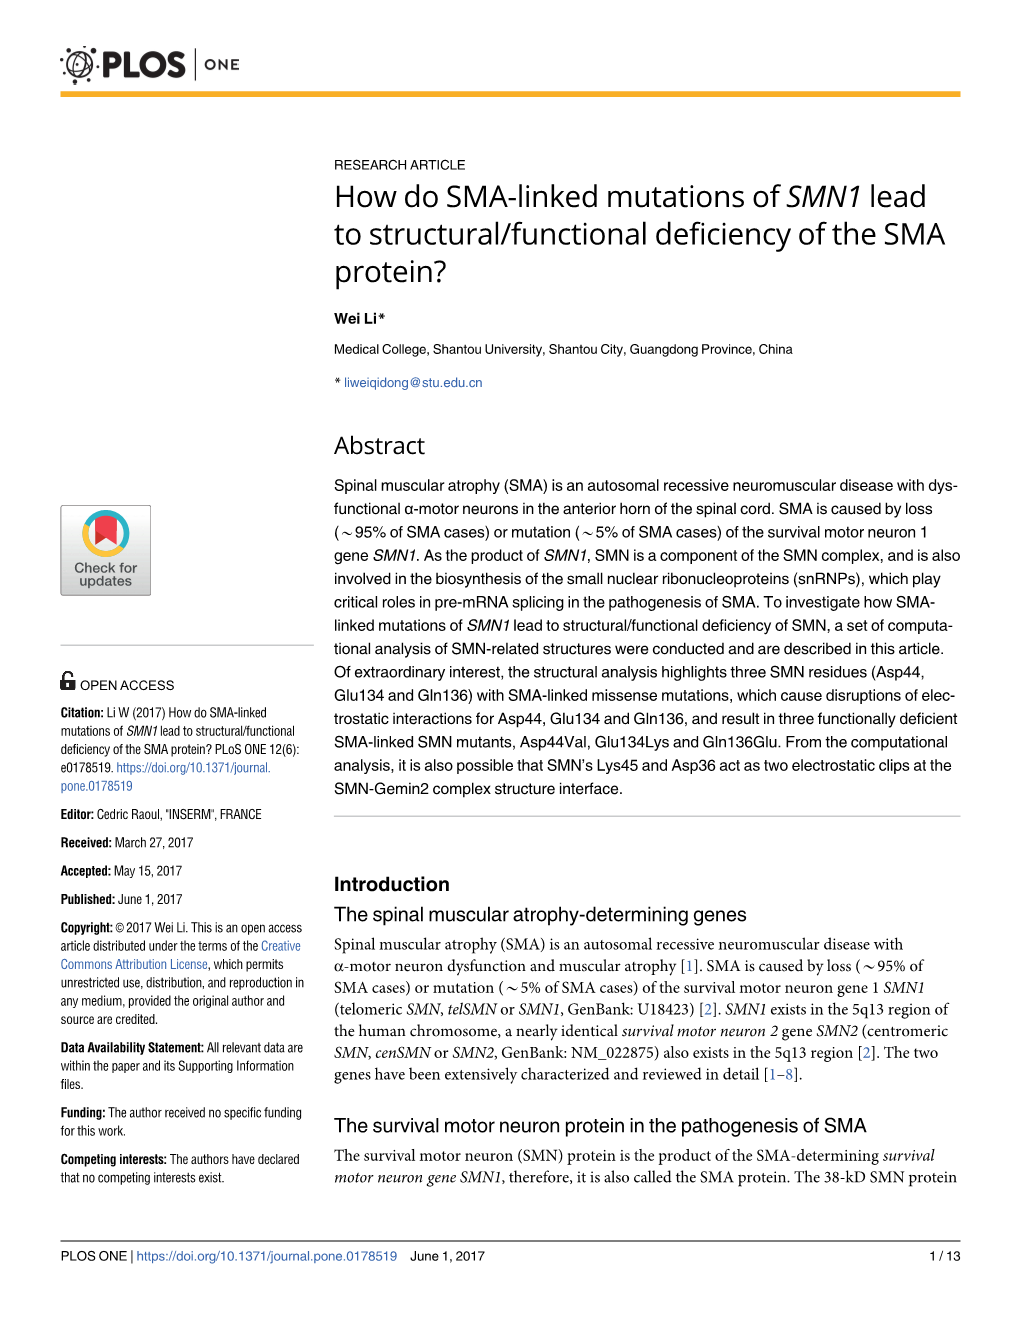 How Do SMA-Linked Mutations of SMN1 Lead to Structural/Functional Deficiency of the SMA Protein?